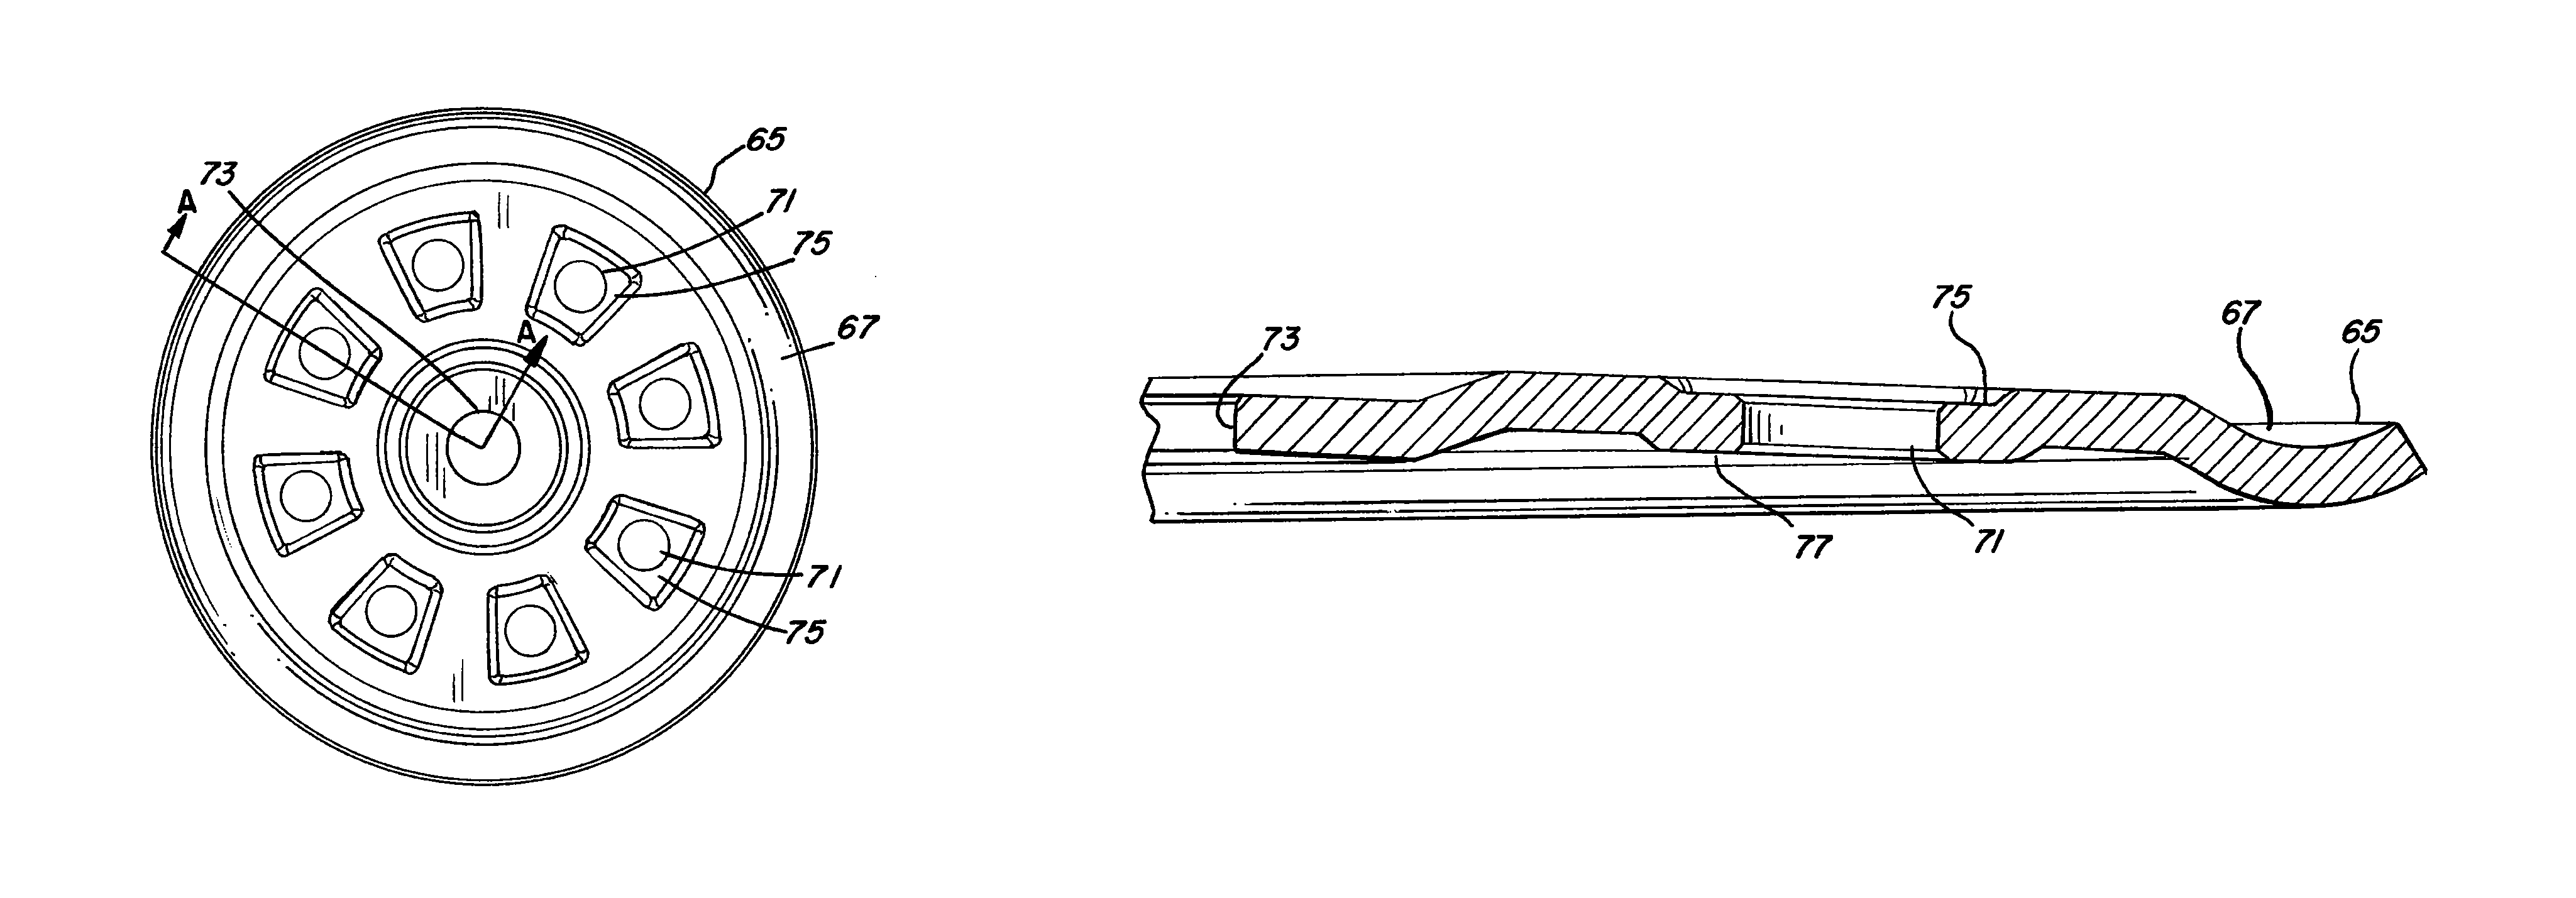 Disk clamp having uniform clamping load and index mark